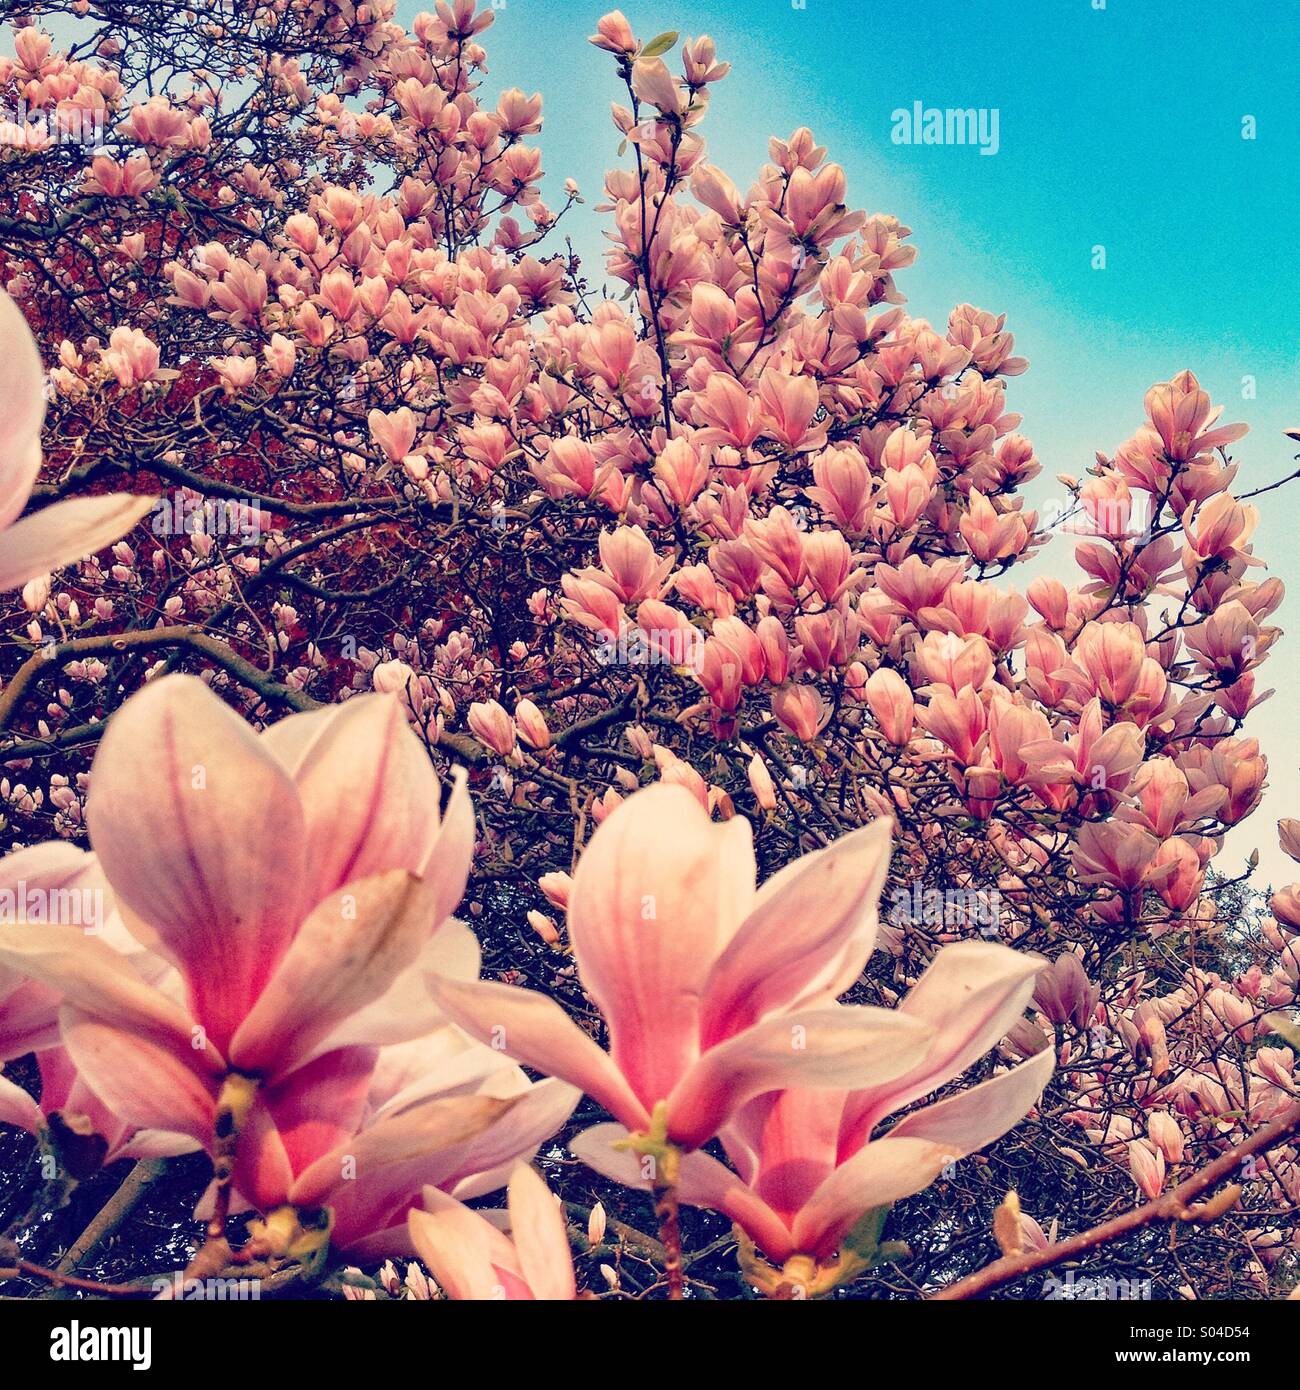 A large magnolia tree is covered with pink blossoms and the flowers stand out against the blue sky in spring. Stock Photo